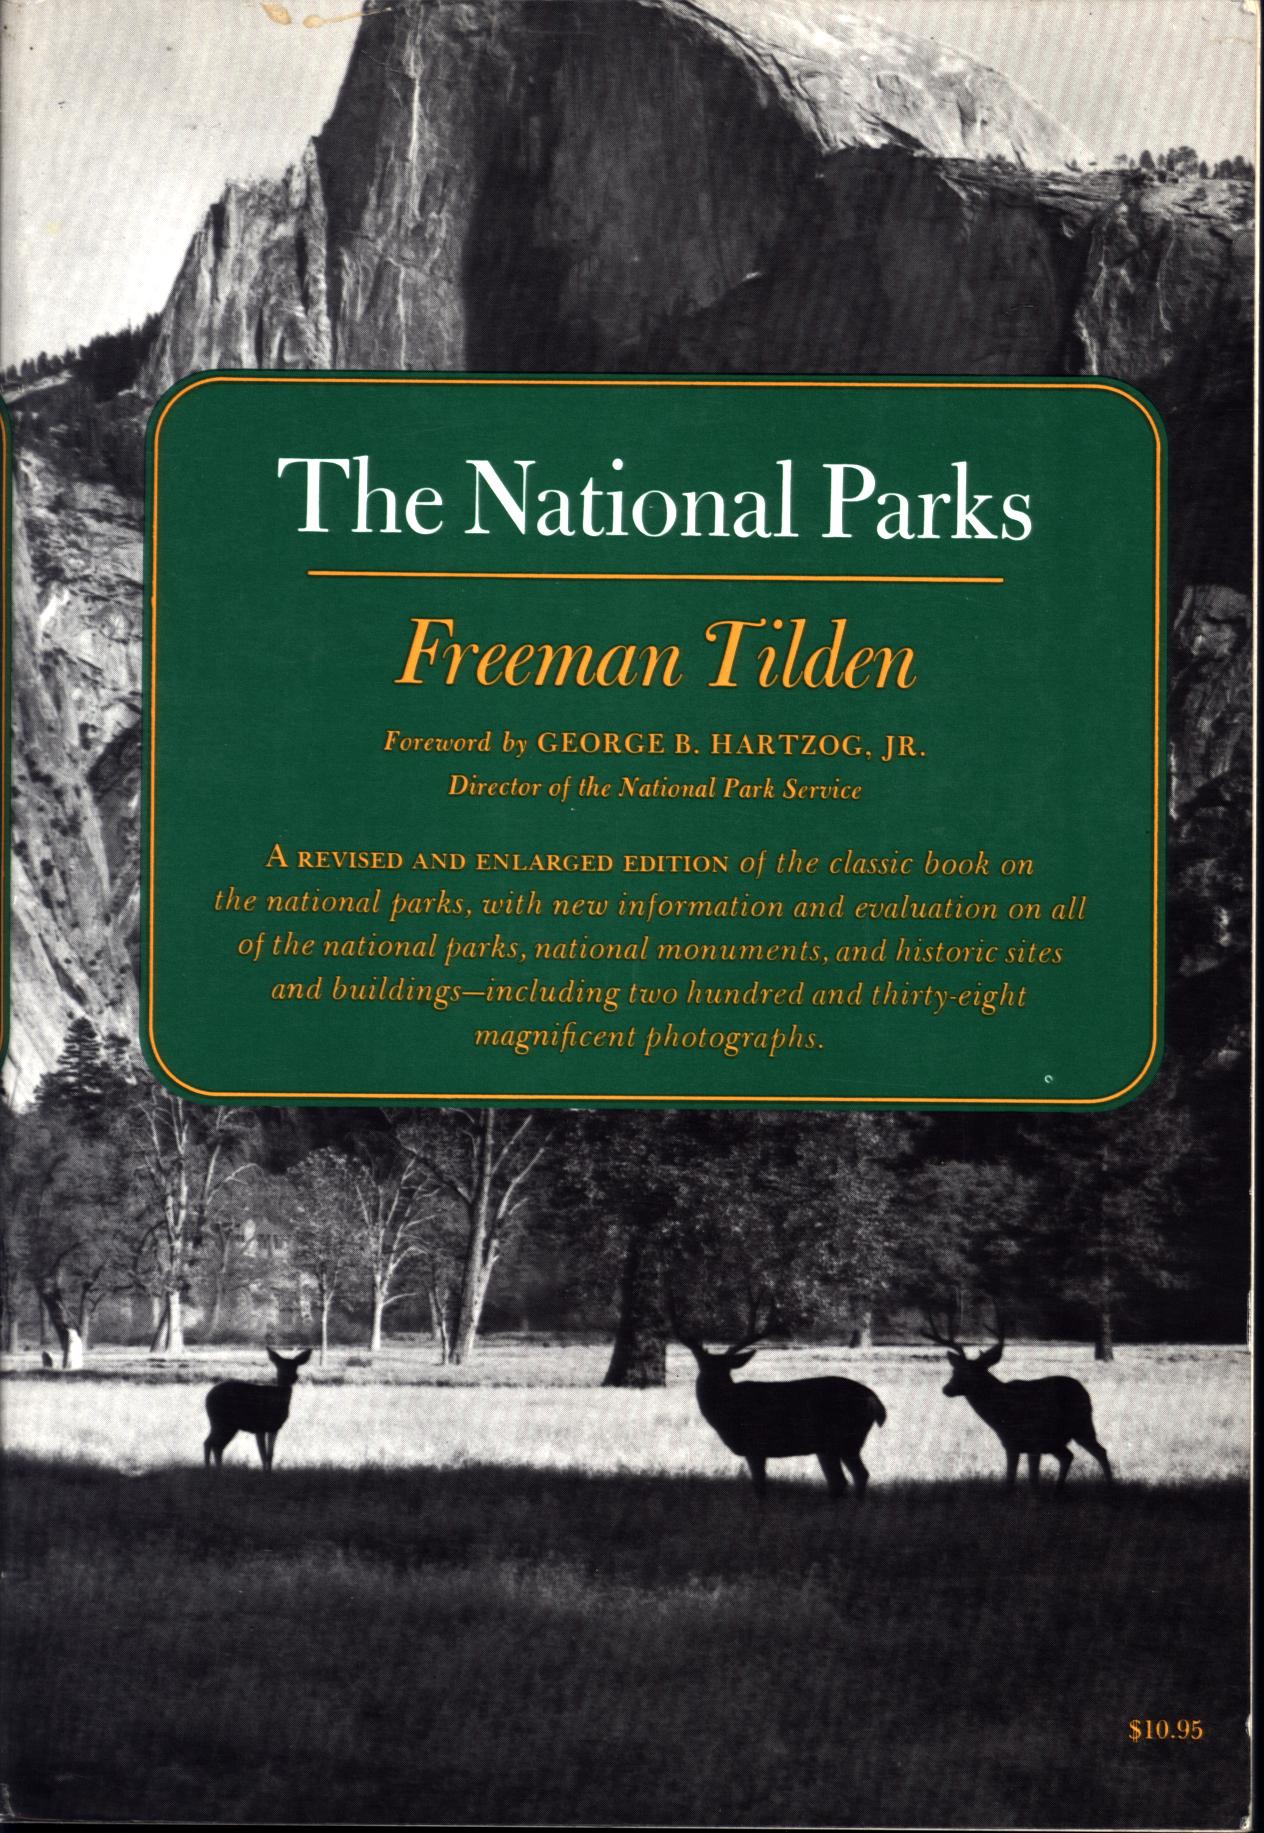 THE NATIONAL PARKS.